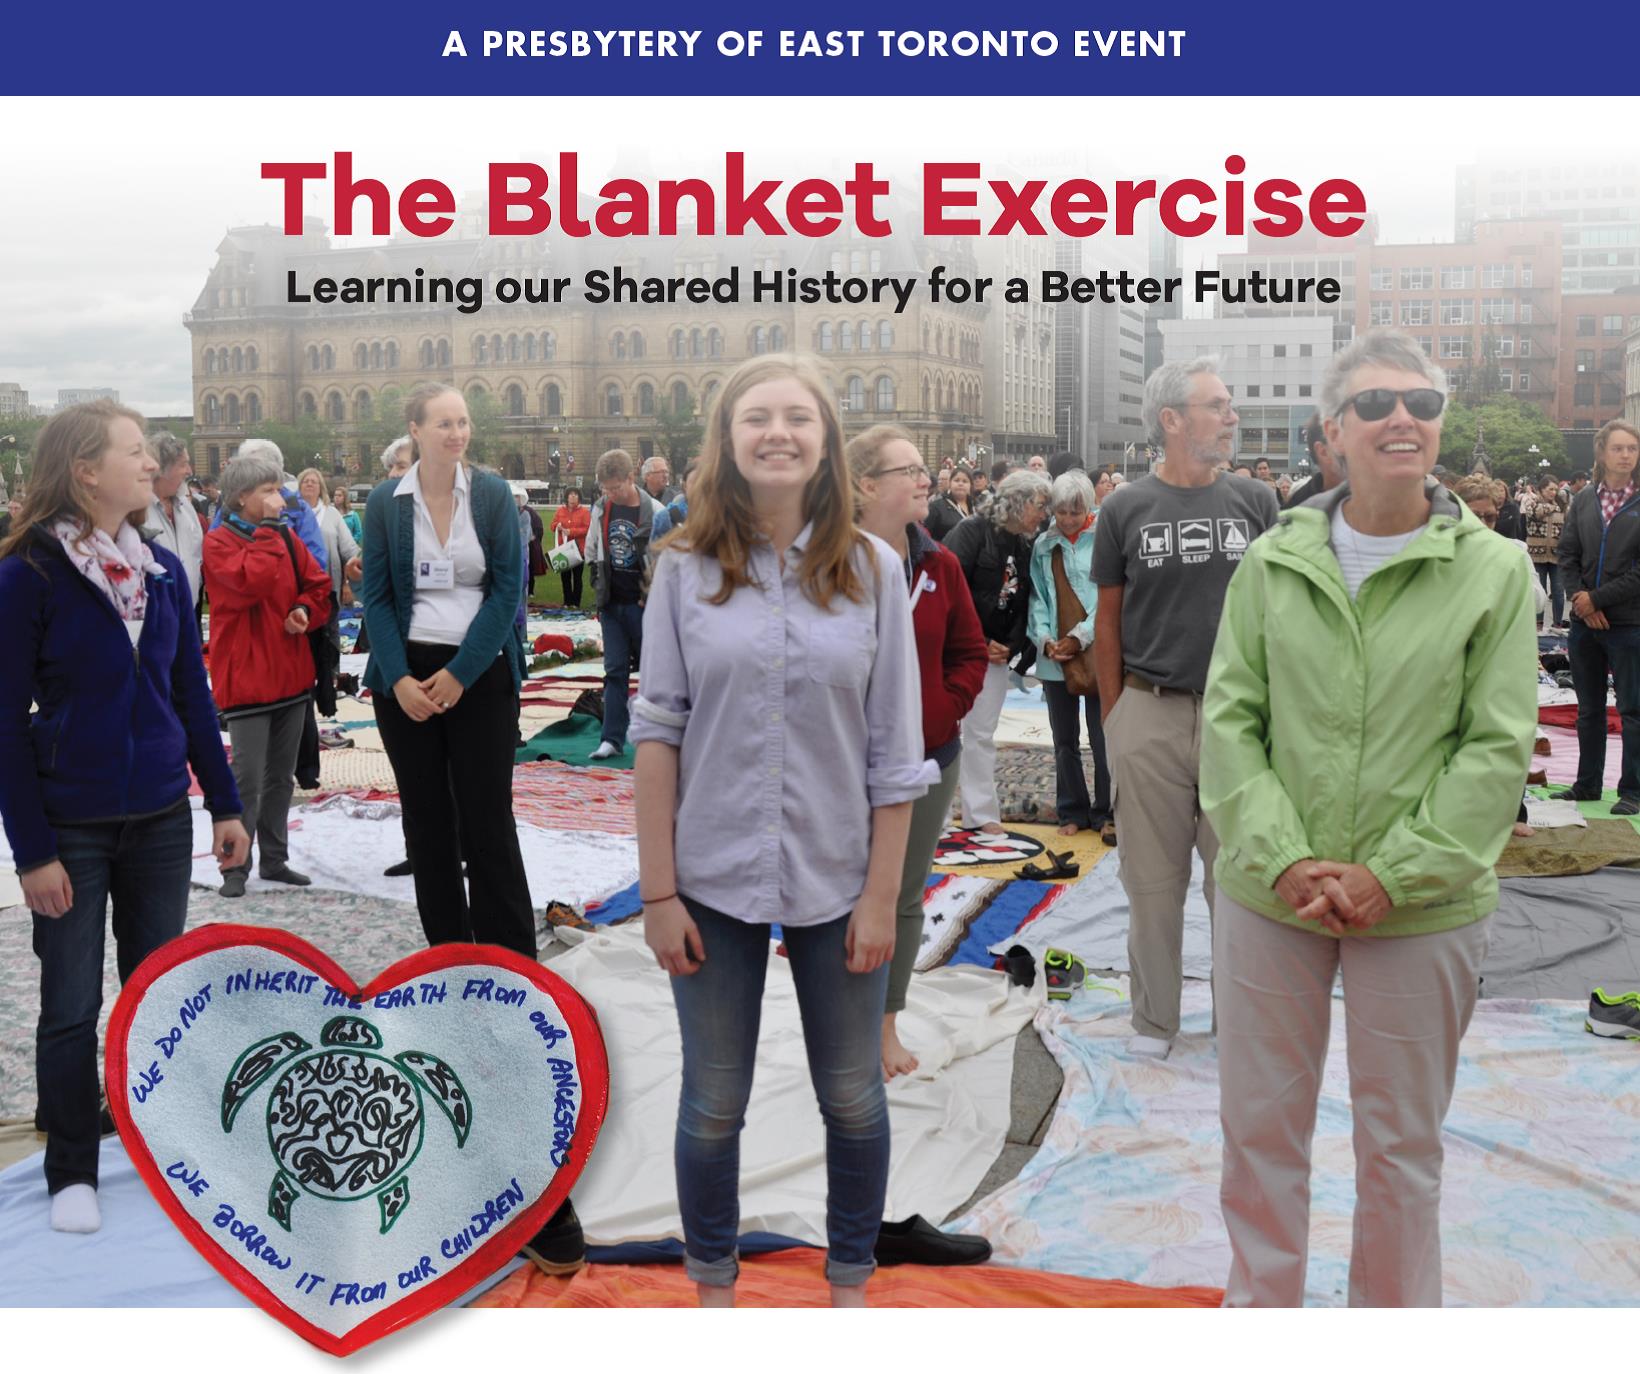 The Blanket Exercise - A Presbytery of East Toronto Event